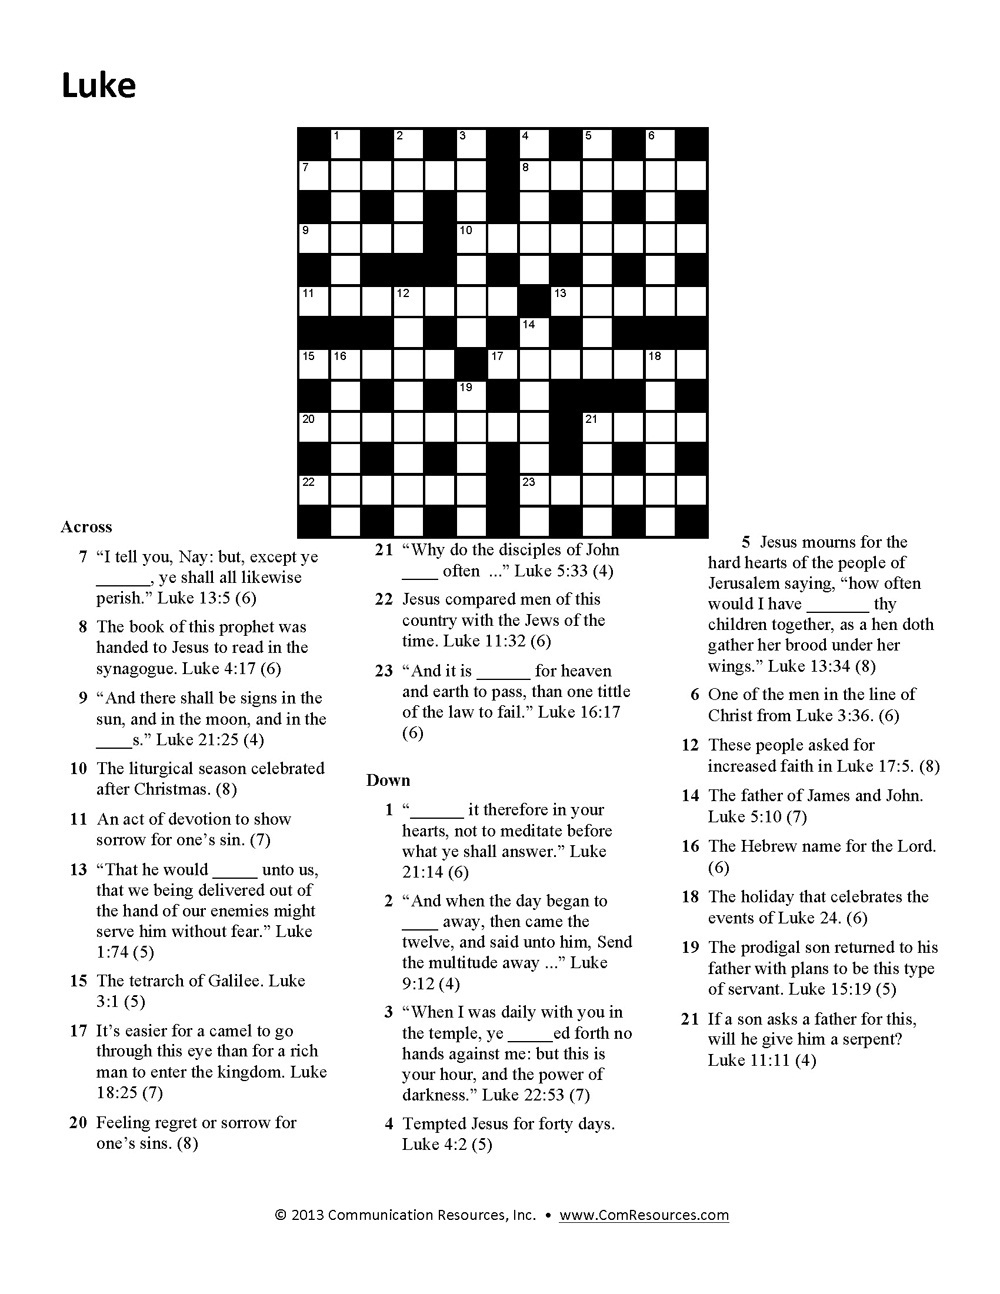 15 Fun Bible Crossword Puzzles | Kittybabylove - Bible Crossword Puzzles For Adults Printable